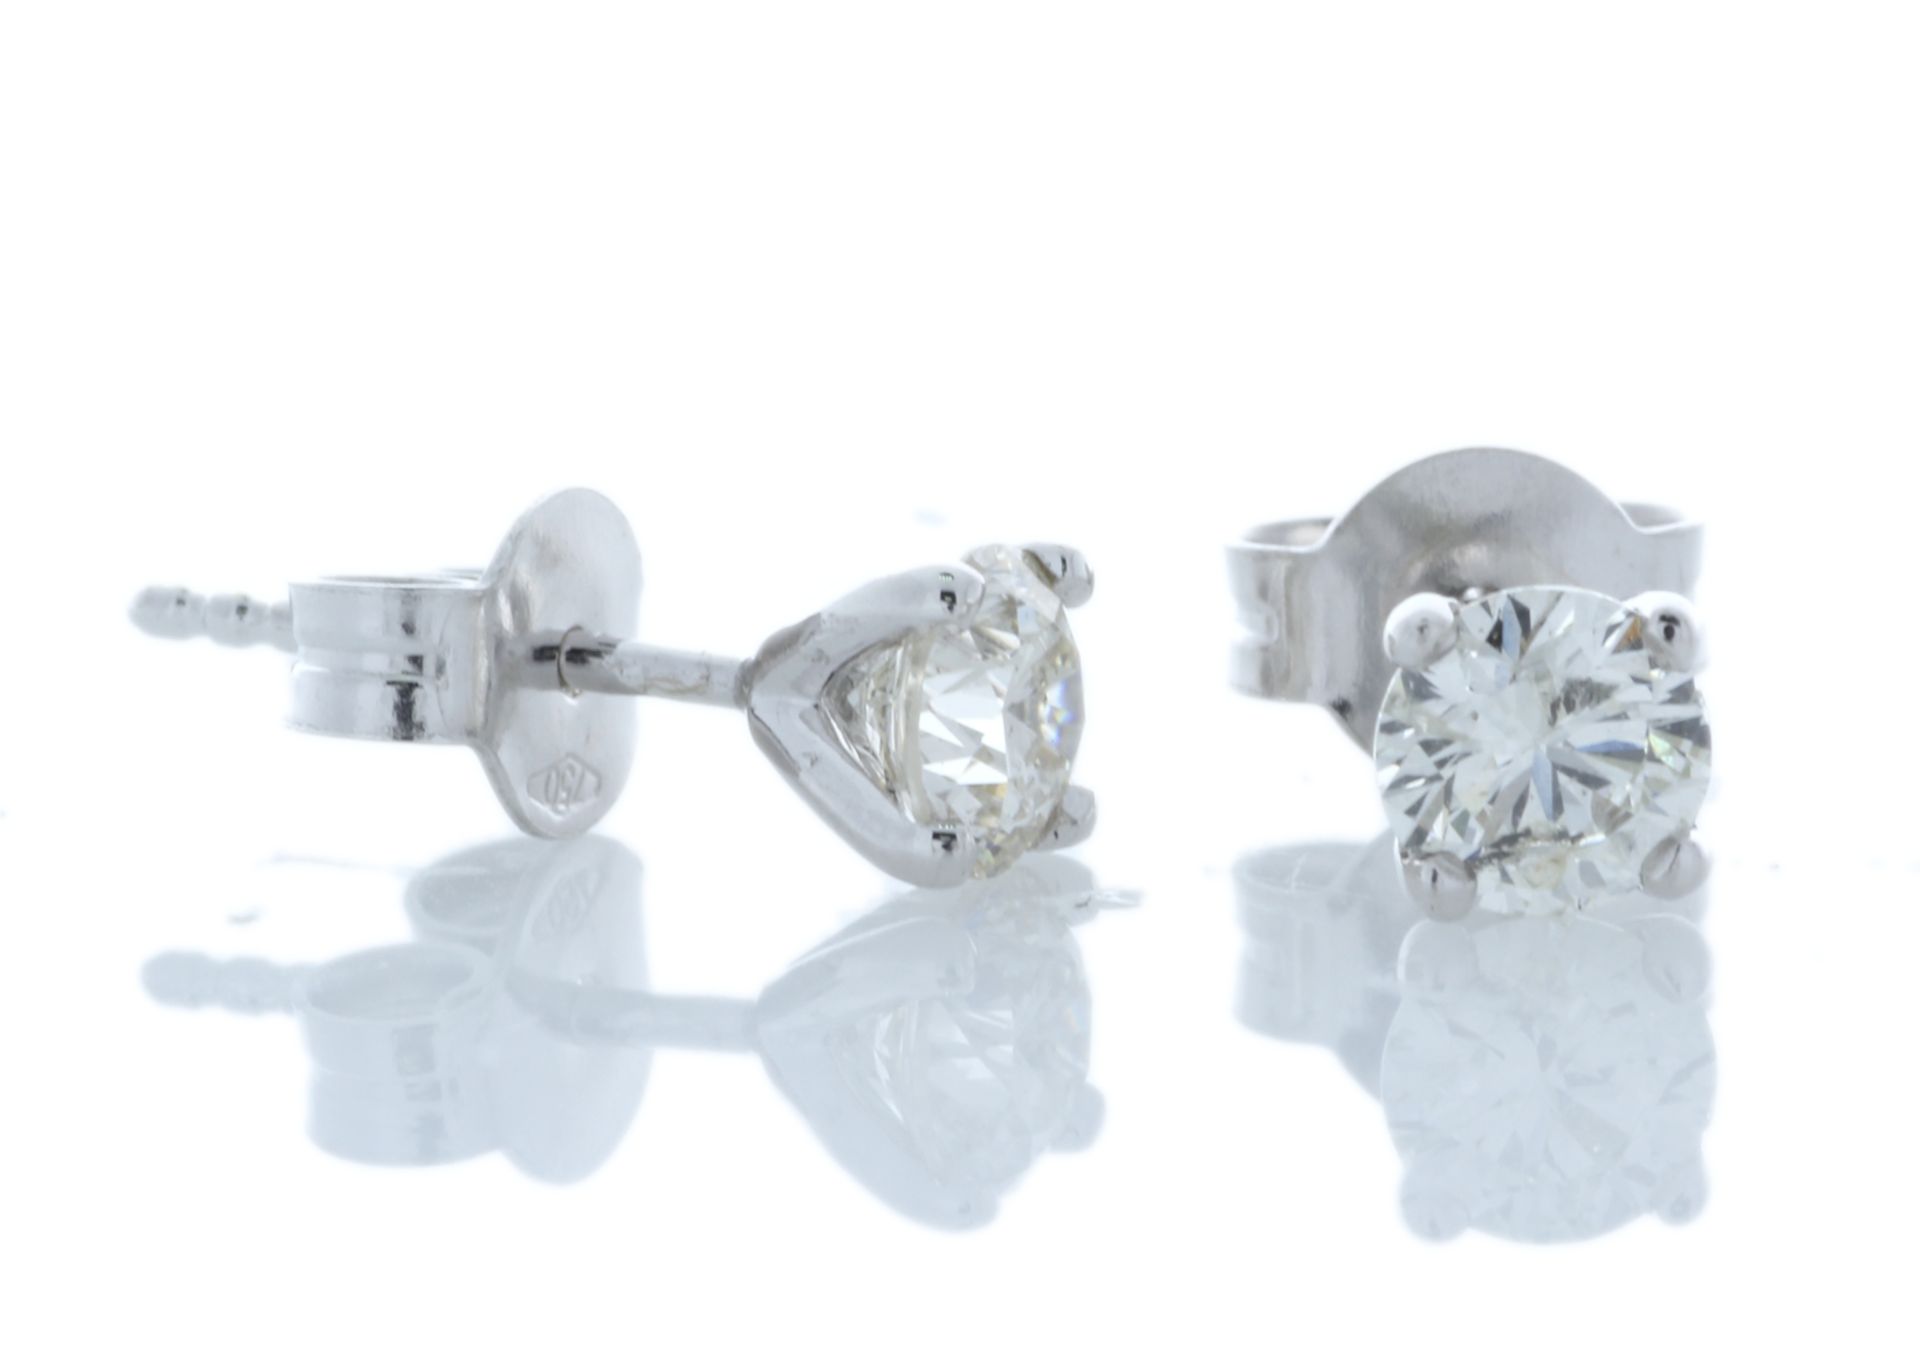 18ct White Gold Wire Set Diamond Earrings 0.80 Carats - Valued By GIE £15,070.00 - These classic - Image 3 of 4